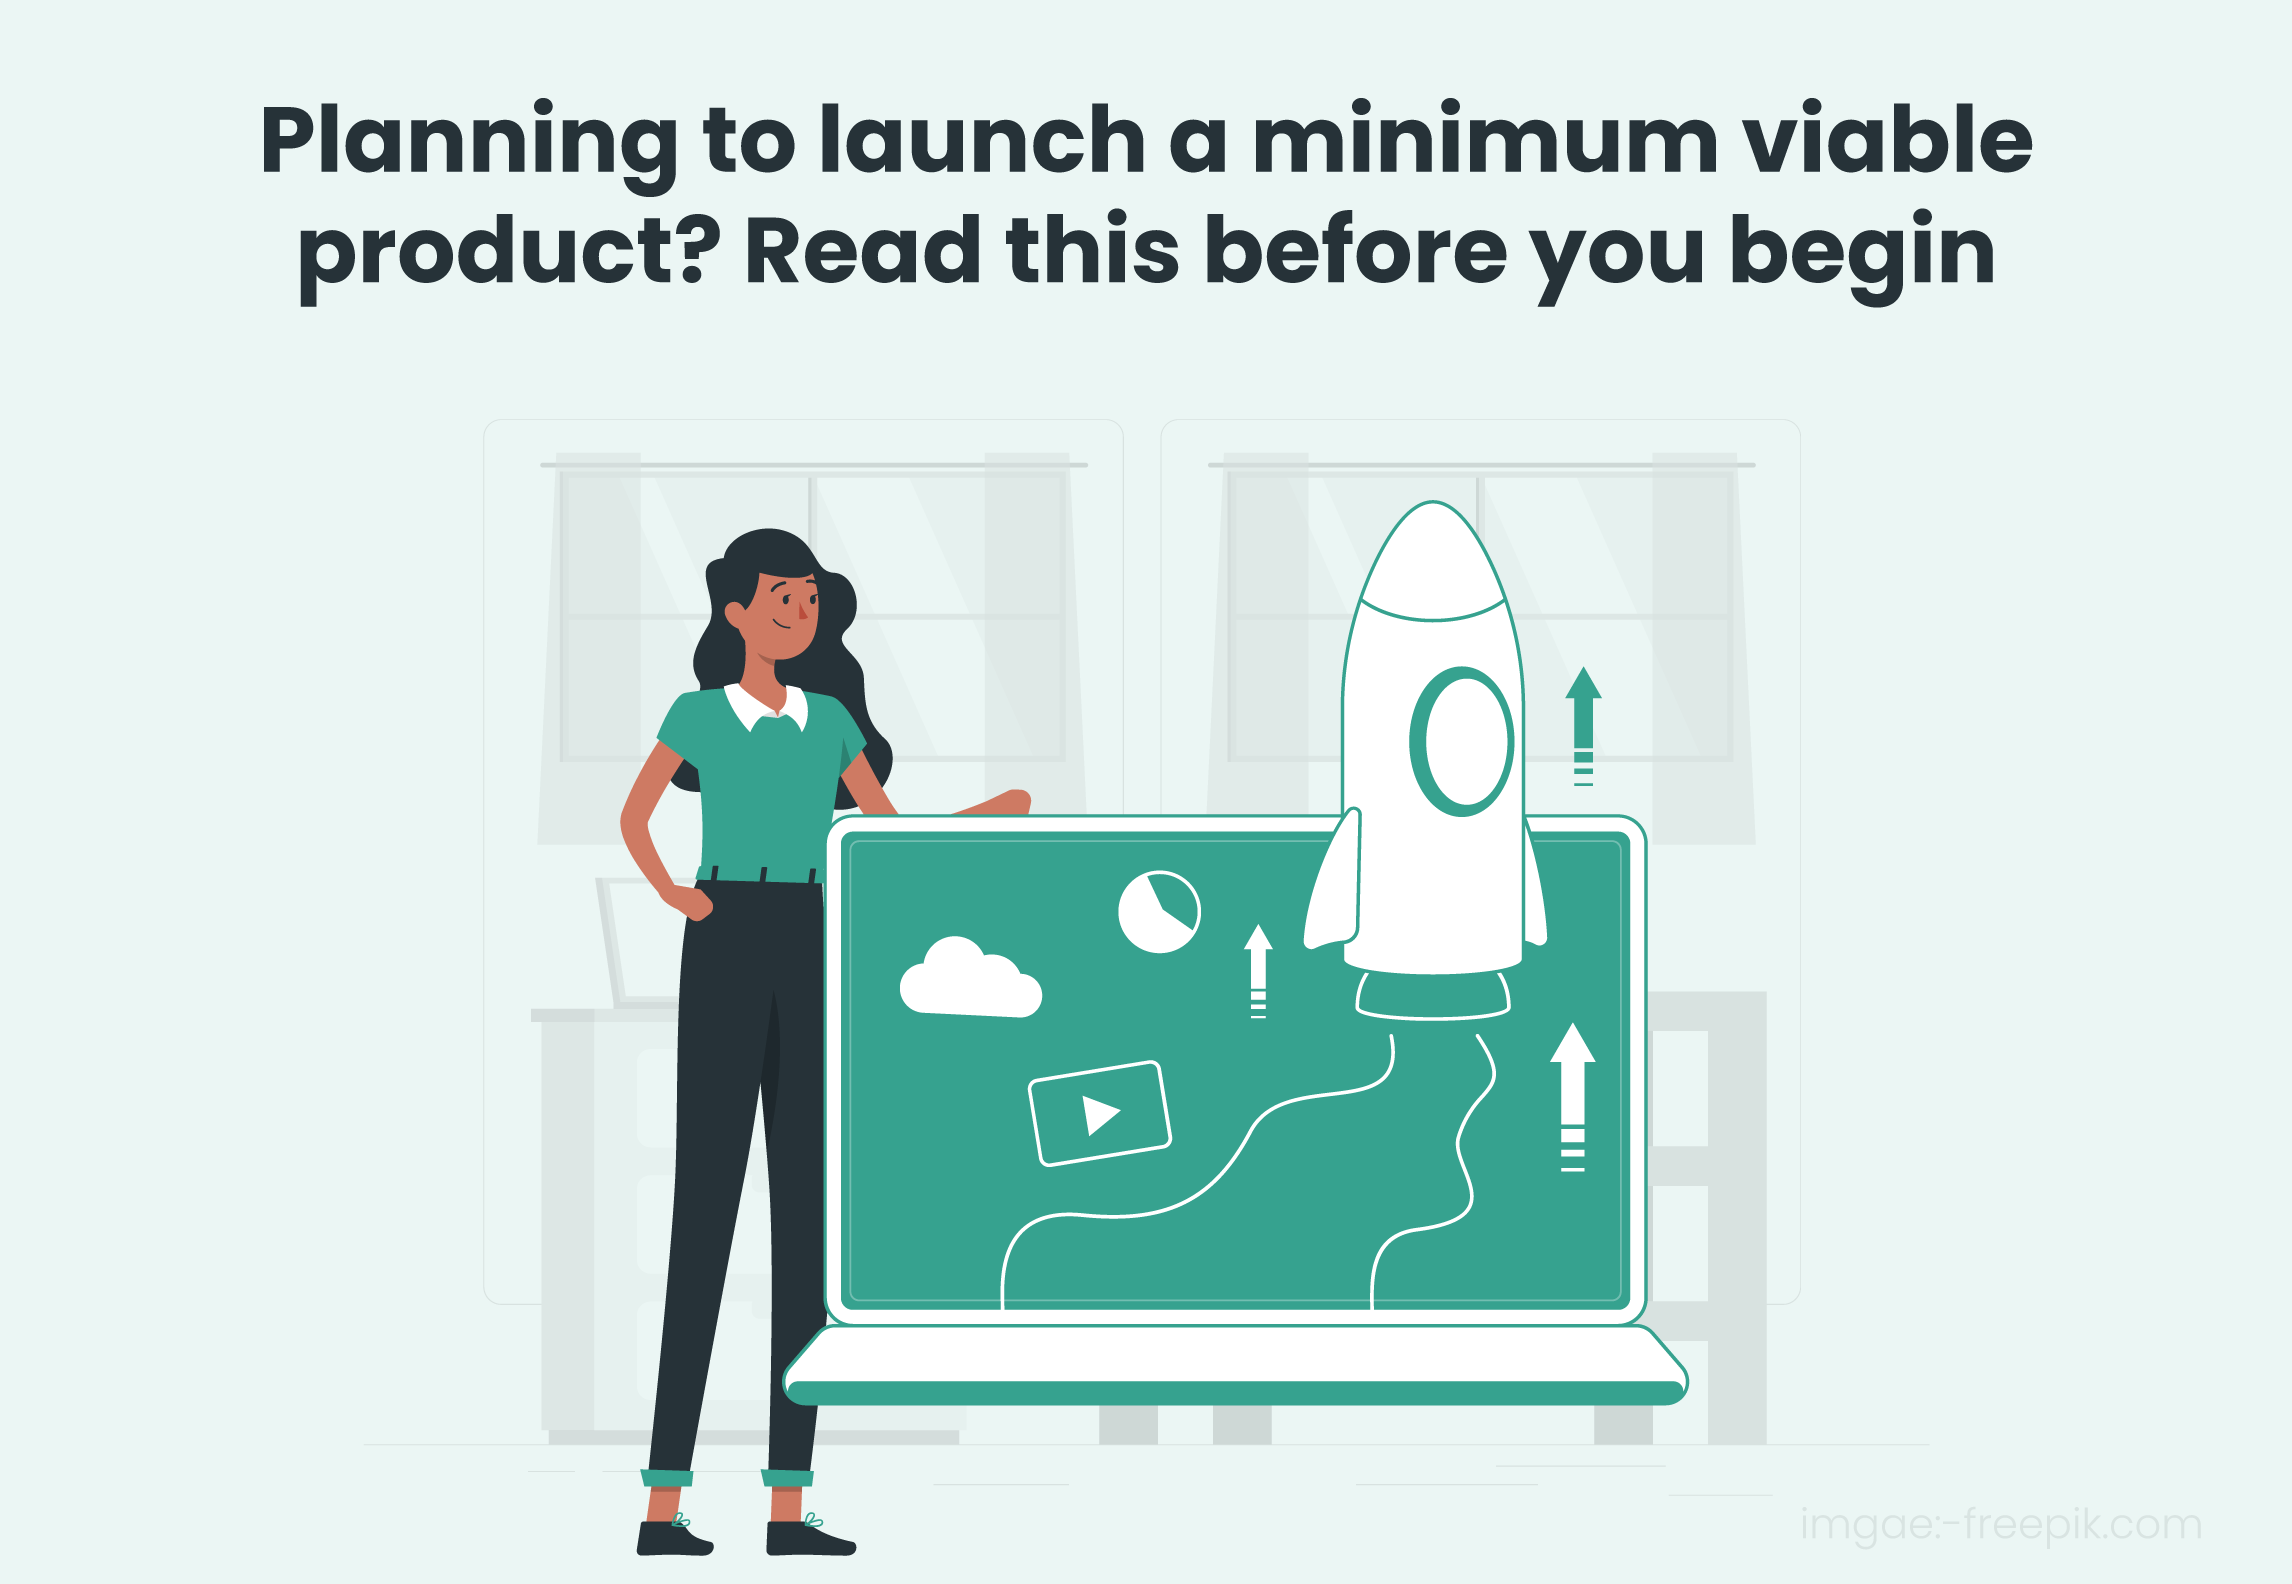 This article serves as a step-by-step guide that will provide you with a basic understanding of how to plan a minimum viable product.